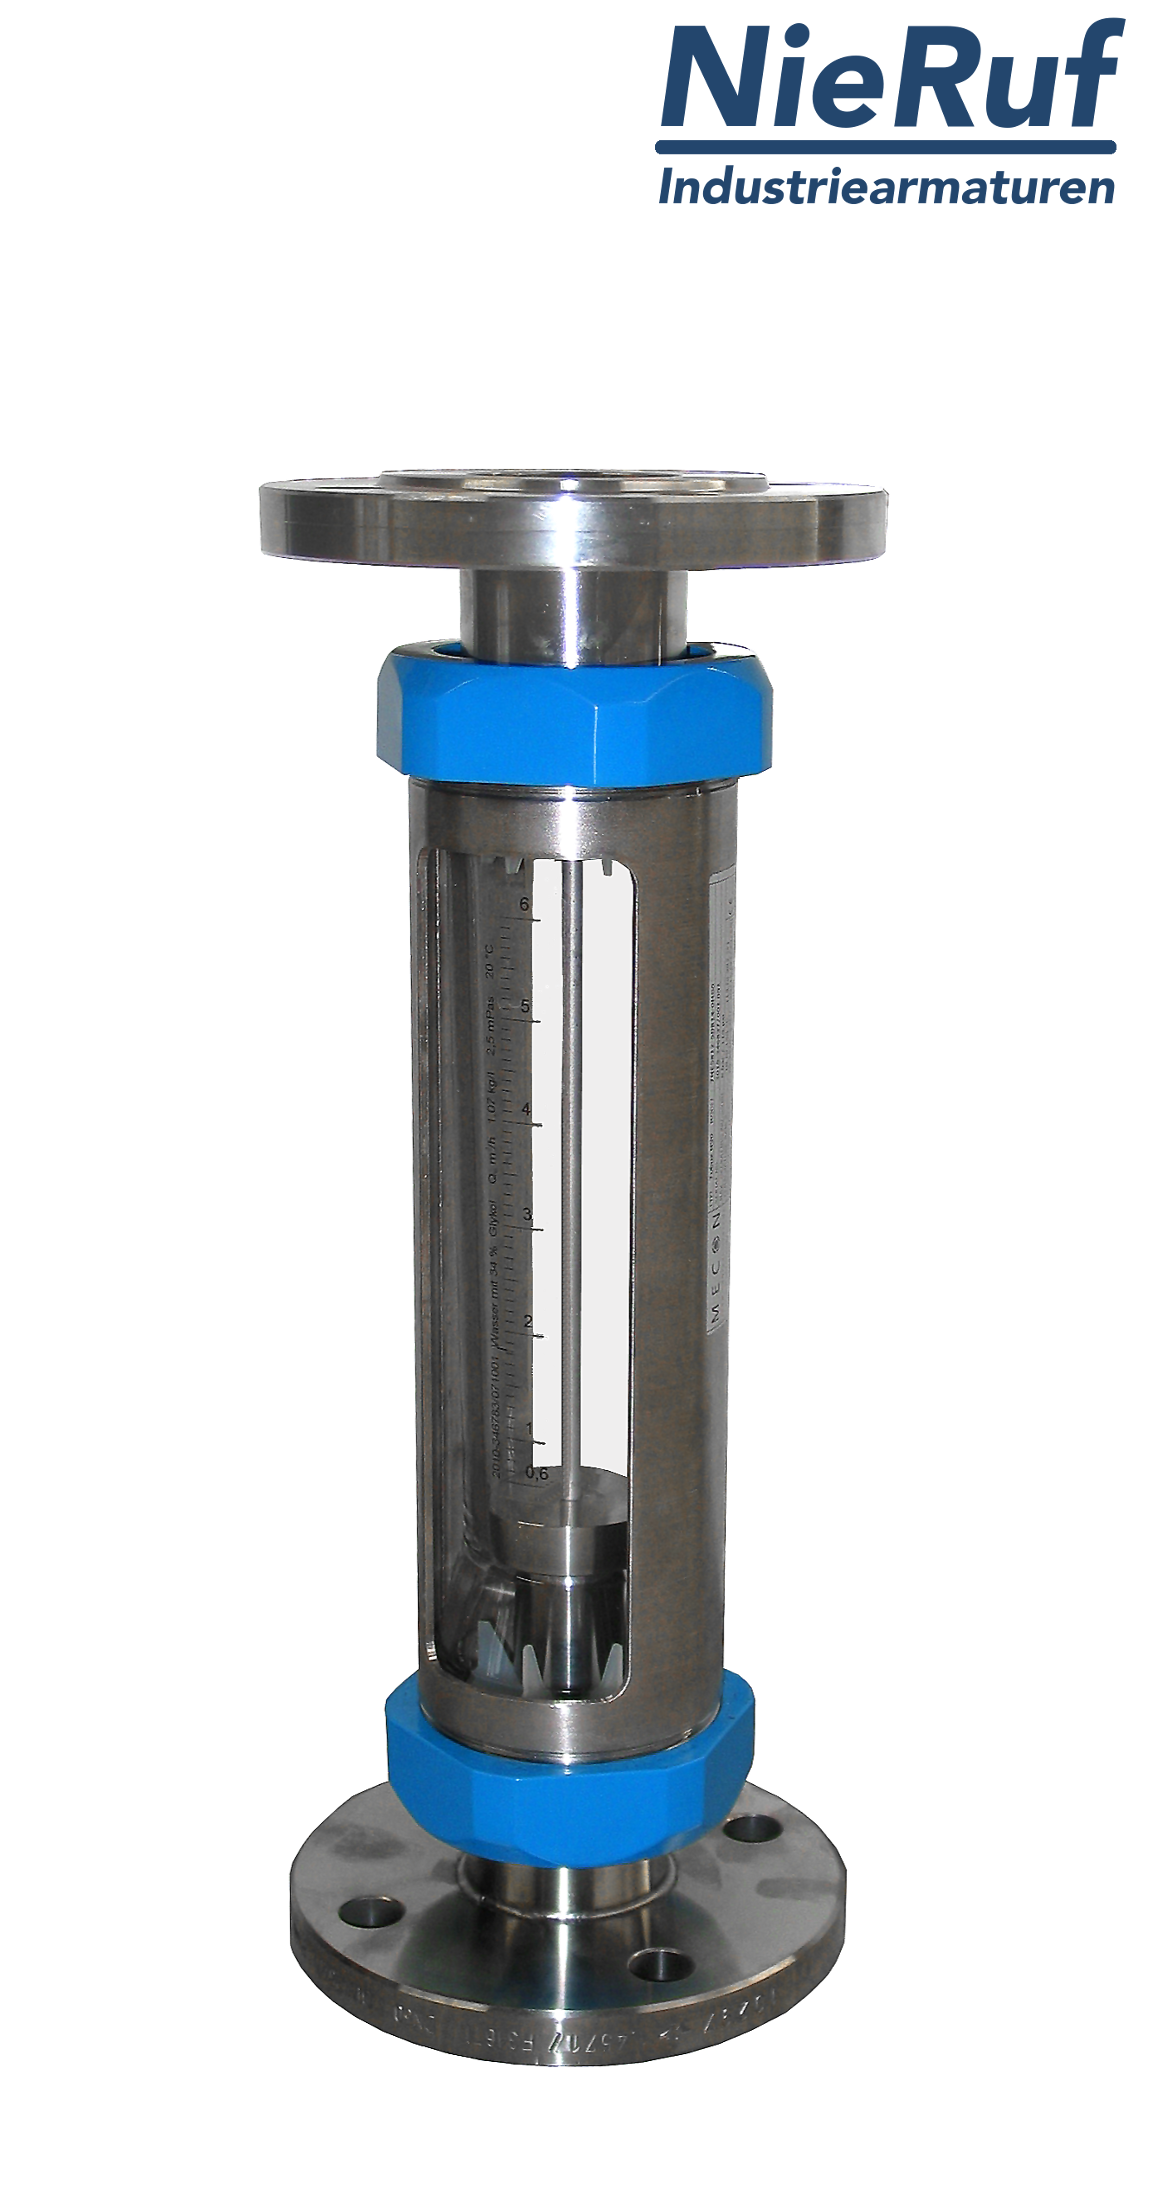 Variable area flowmeter stainless steel + borosilicate flange DN25 40.0 - 400.0 l/h water FKM